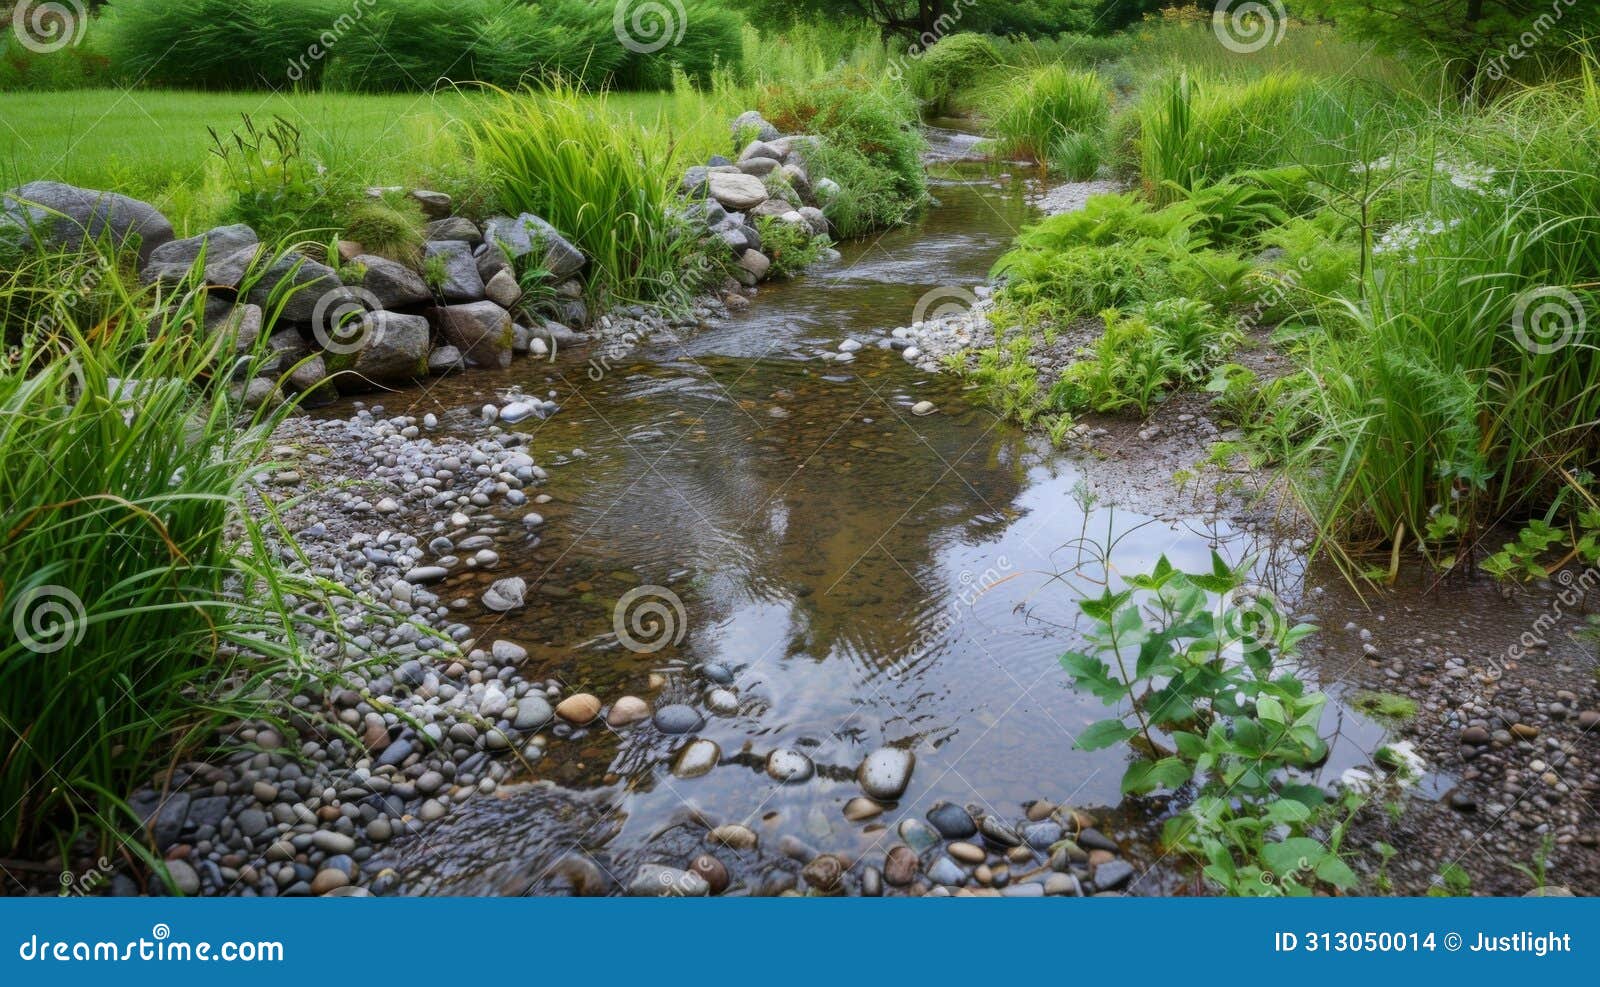 a winding stream now reduced to a mere trickle struggling to sustain the plants and animals that depend on it for